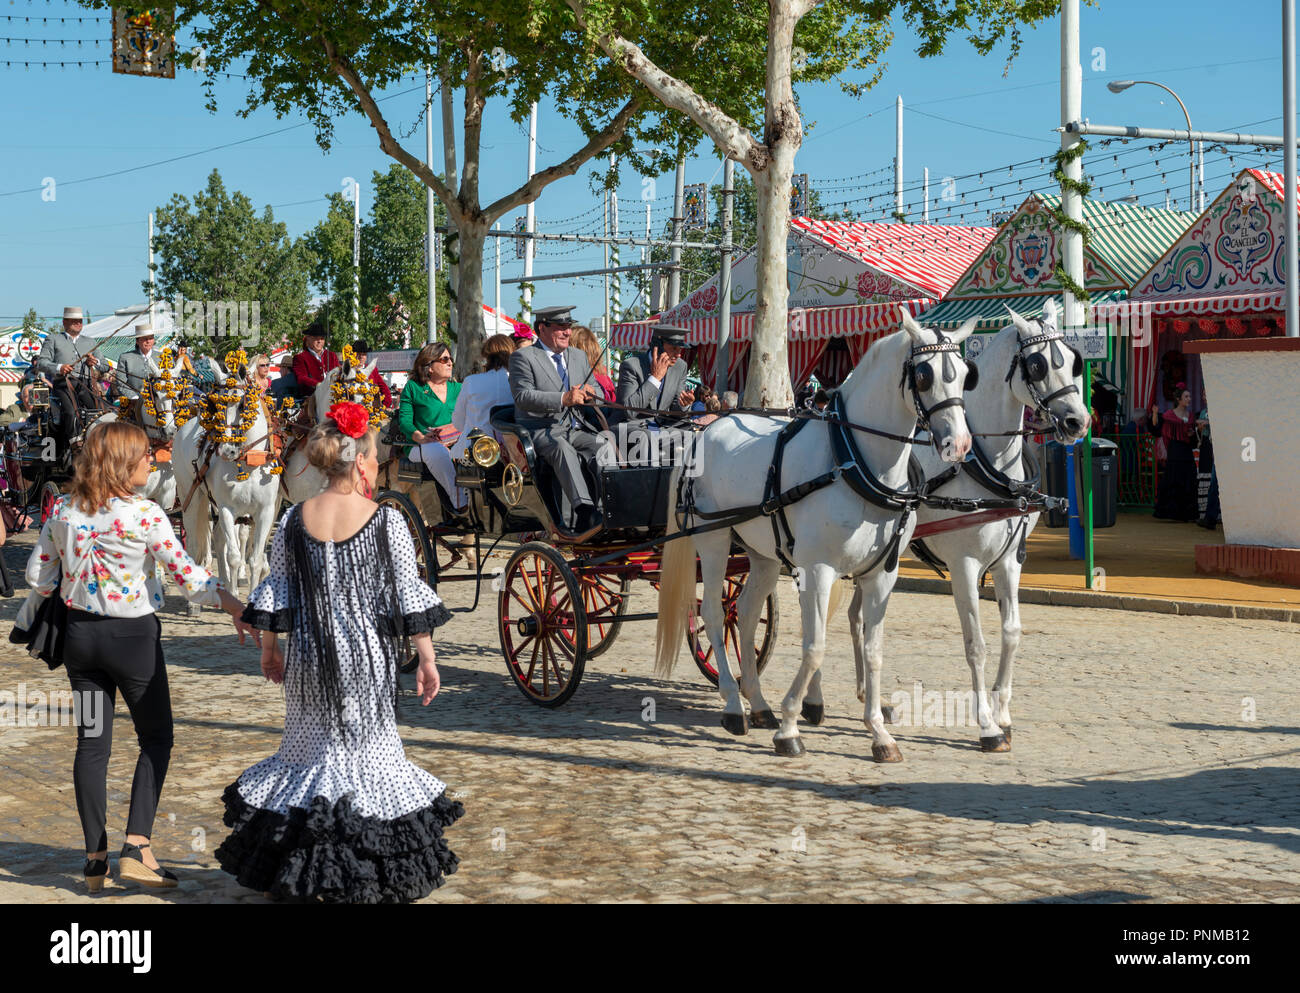 Spaniard in traditional flamenco dresses, decorated horse-drawn carriage in front of Casetas, Feria de Abril, Sevilla, Andalusia Stock Photo